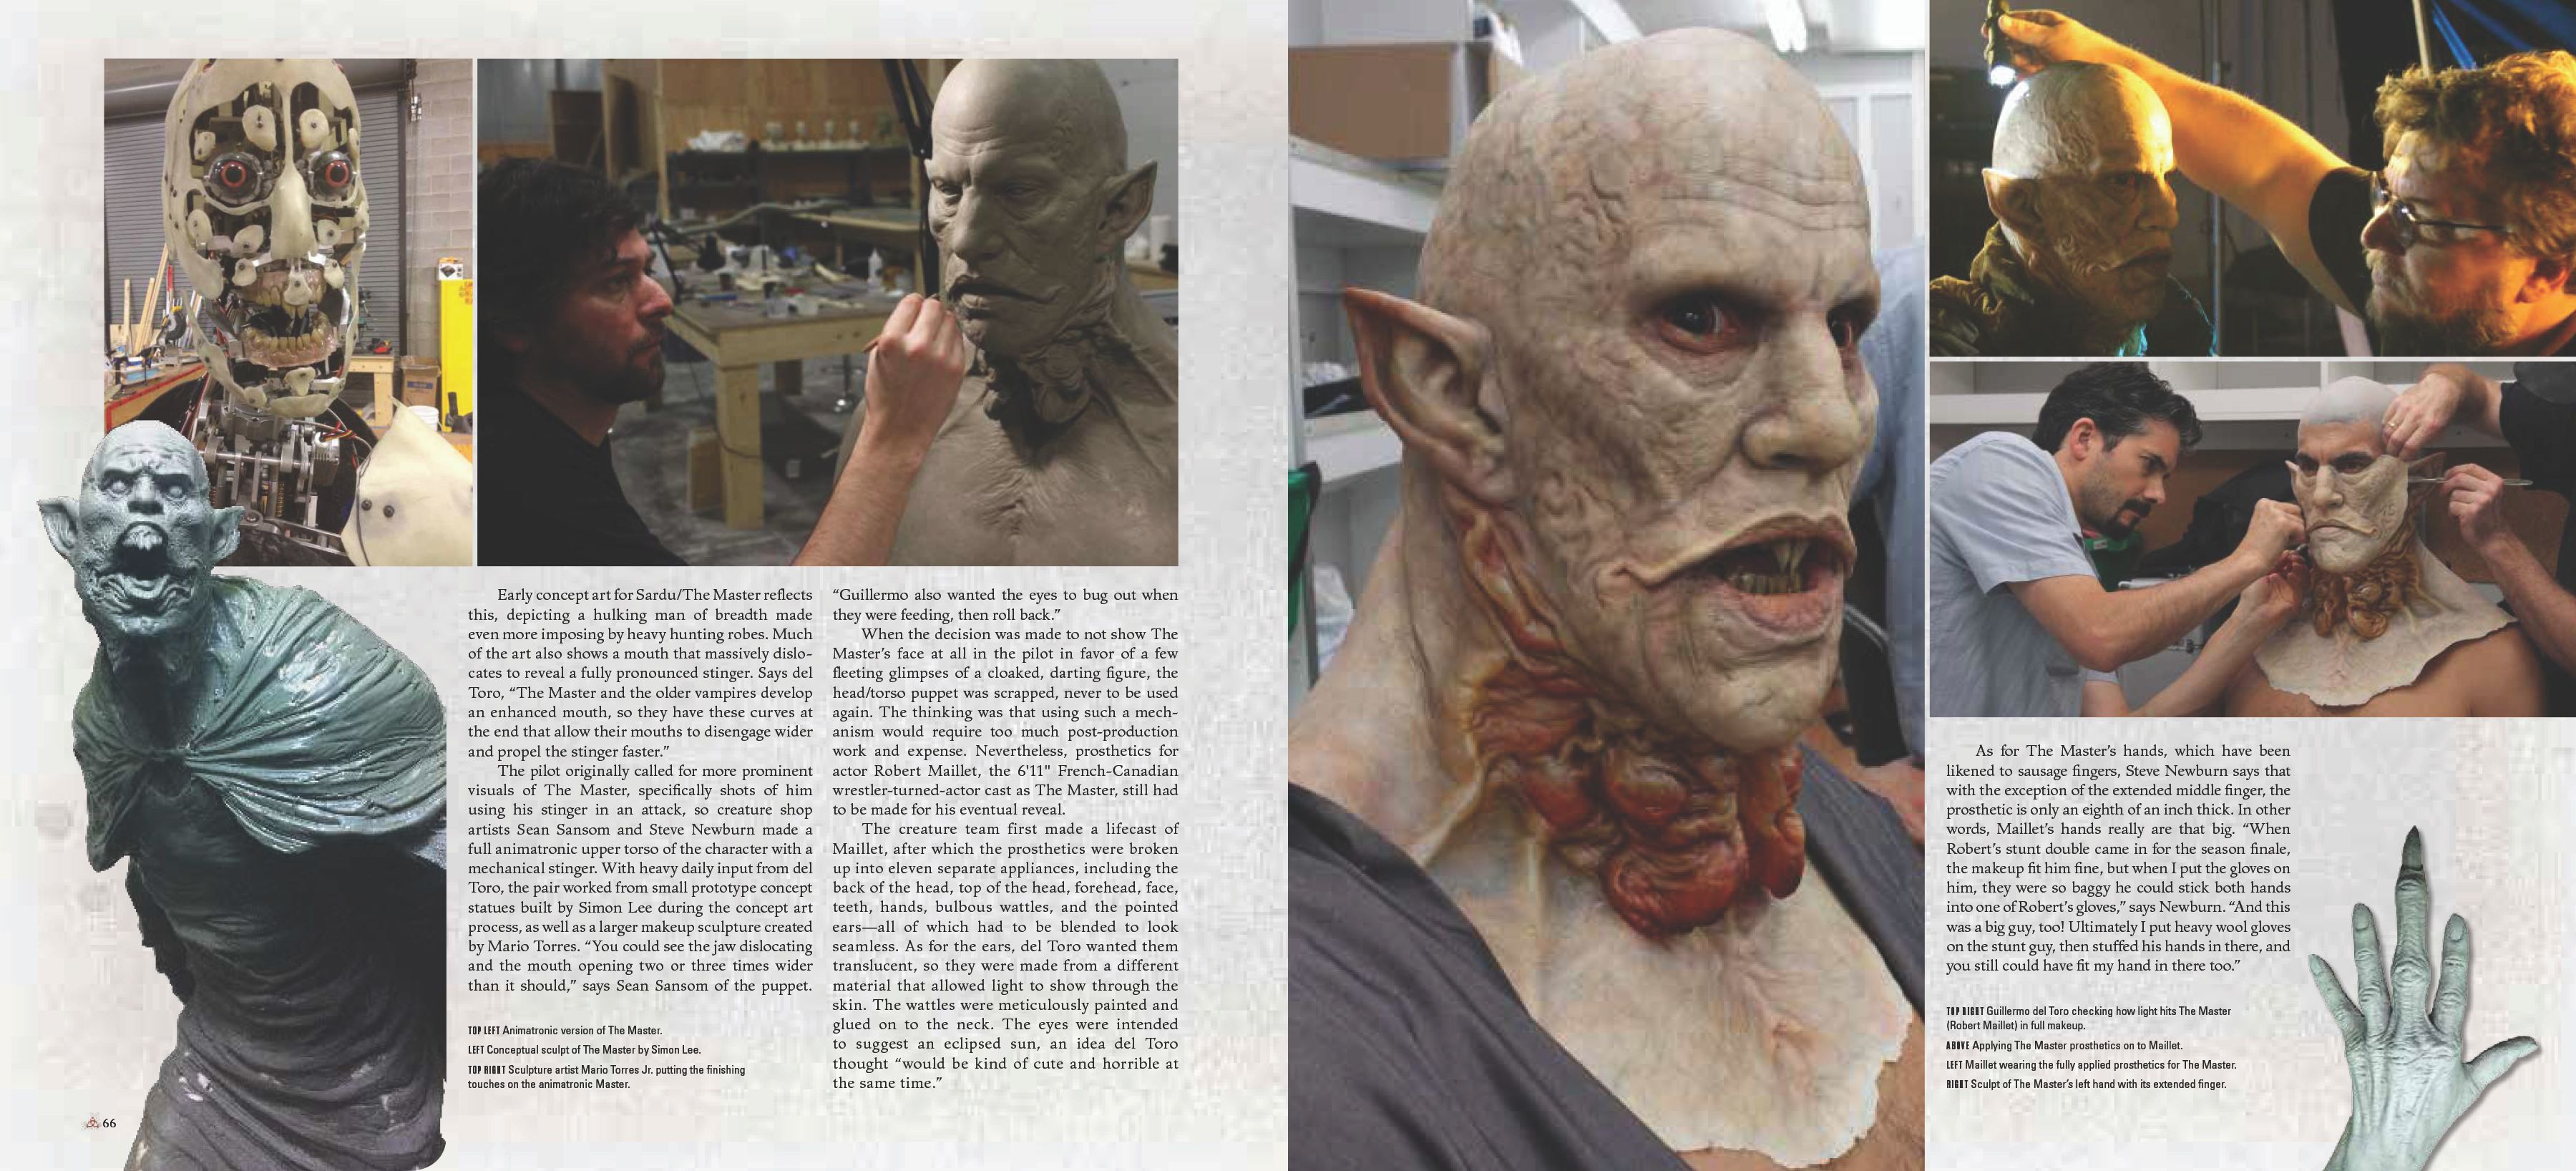 The Art of the Strain Book Review: Gorgeous and Gruesome | Collider3600 x 1636